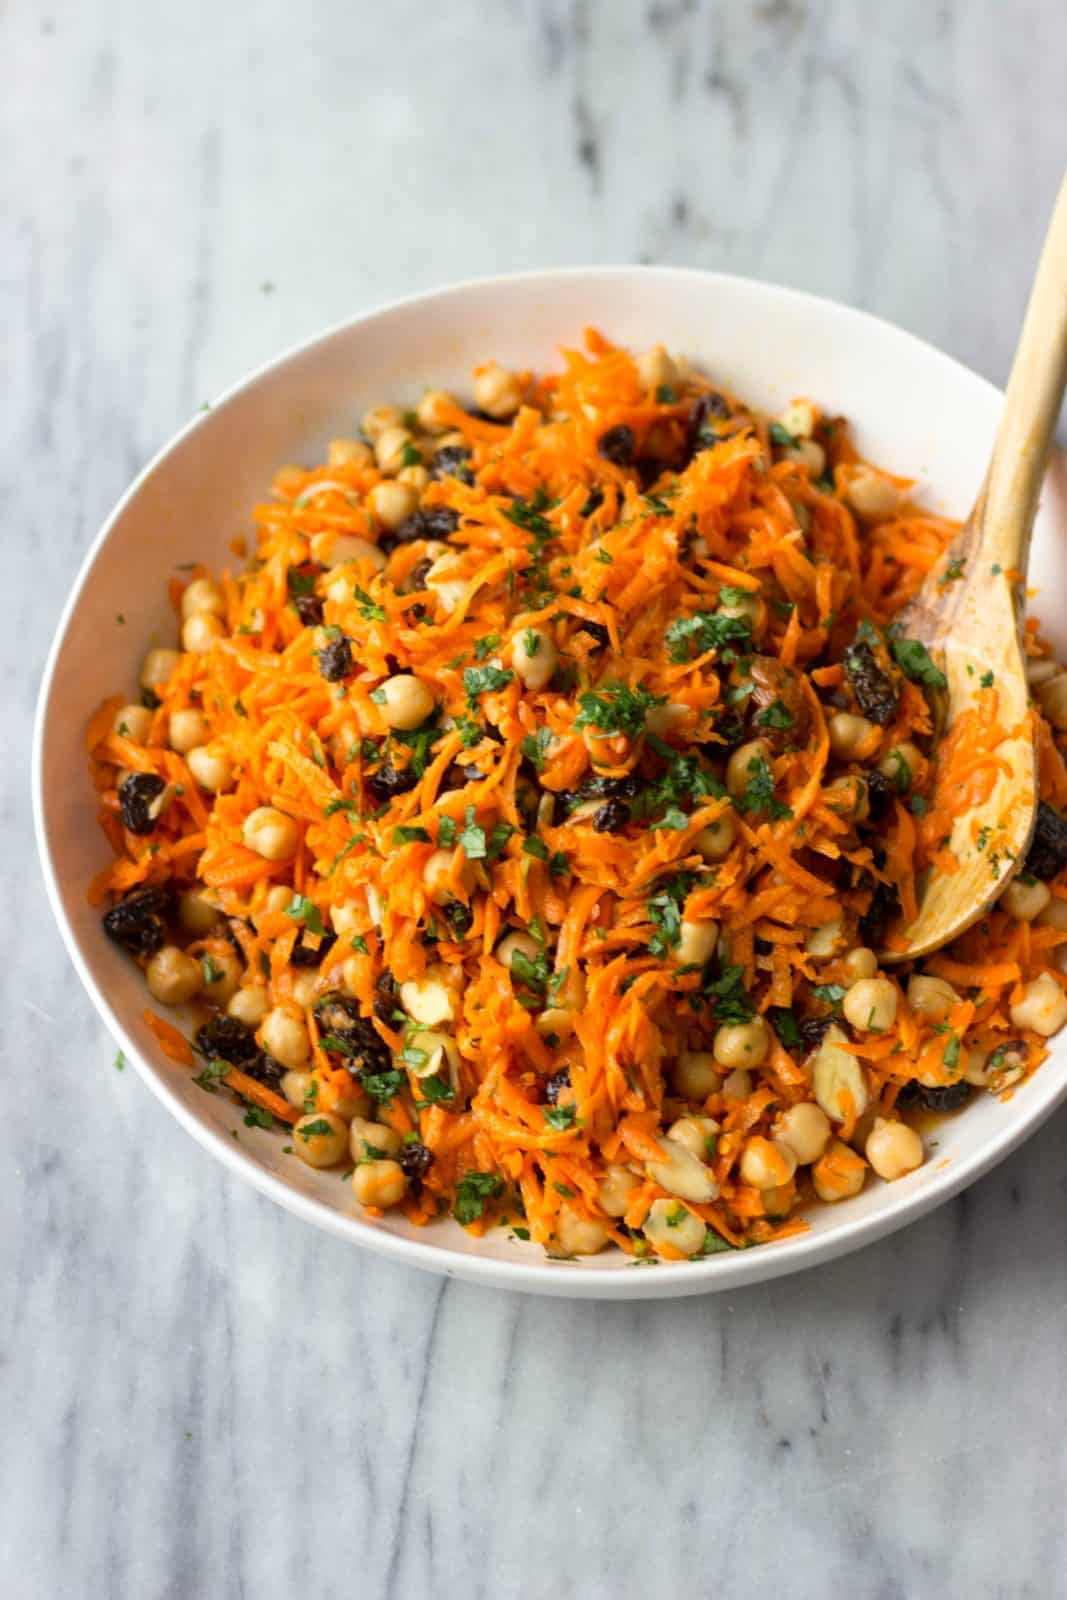 Finished Carrot, Chickpea & Raisin Salad in a white serving bowl